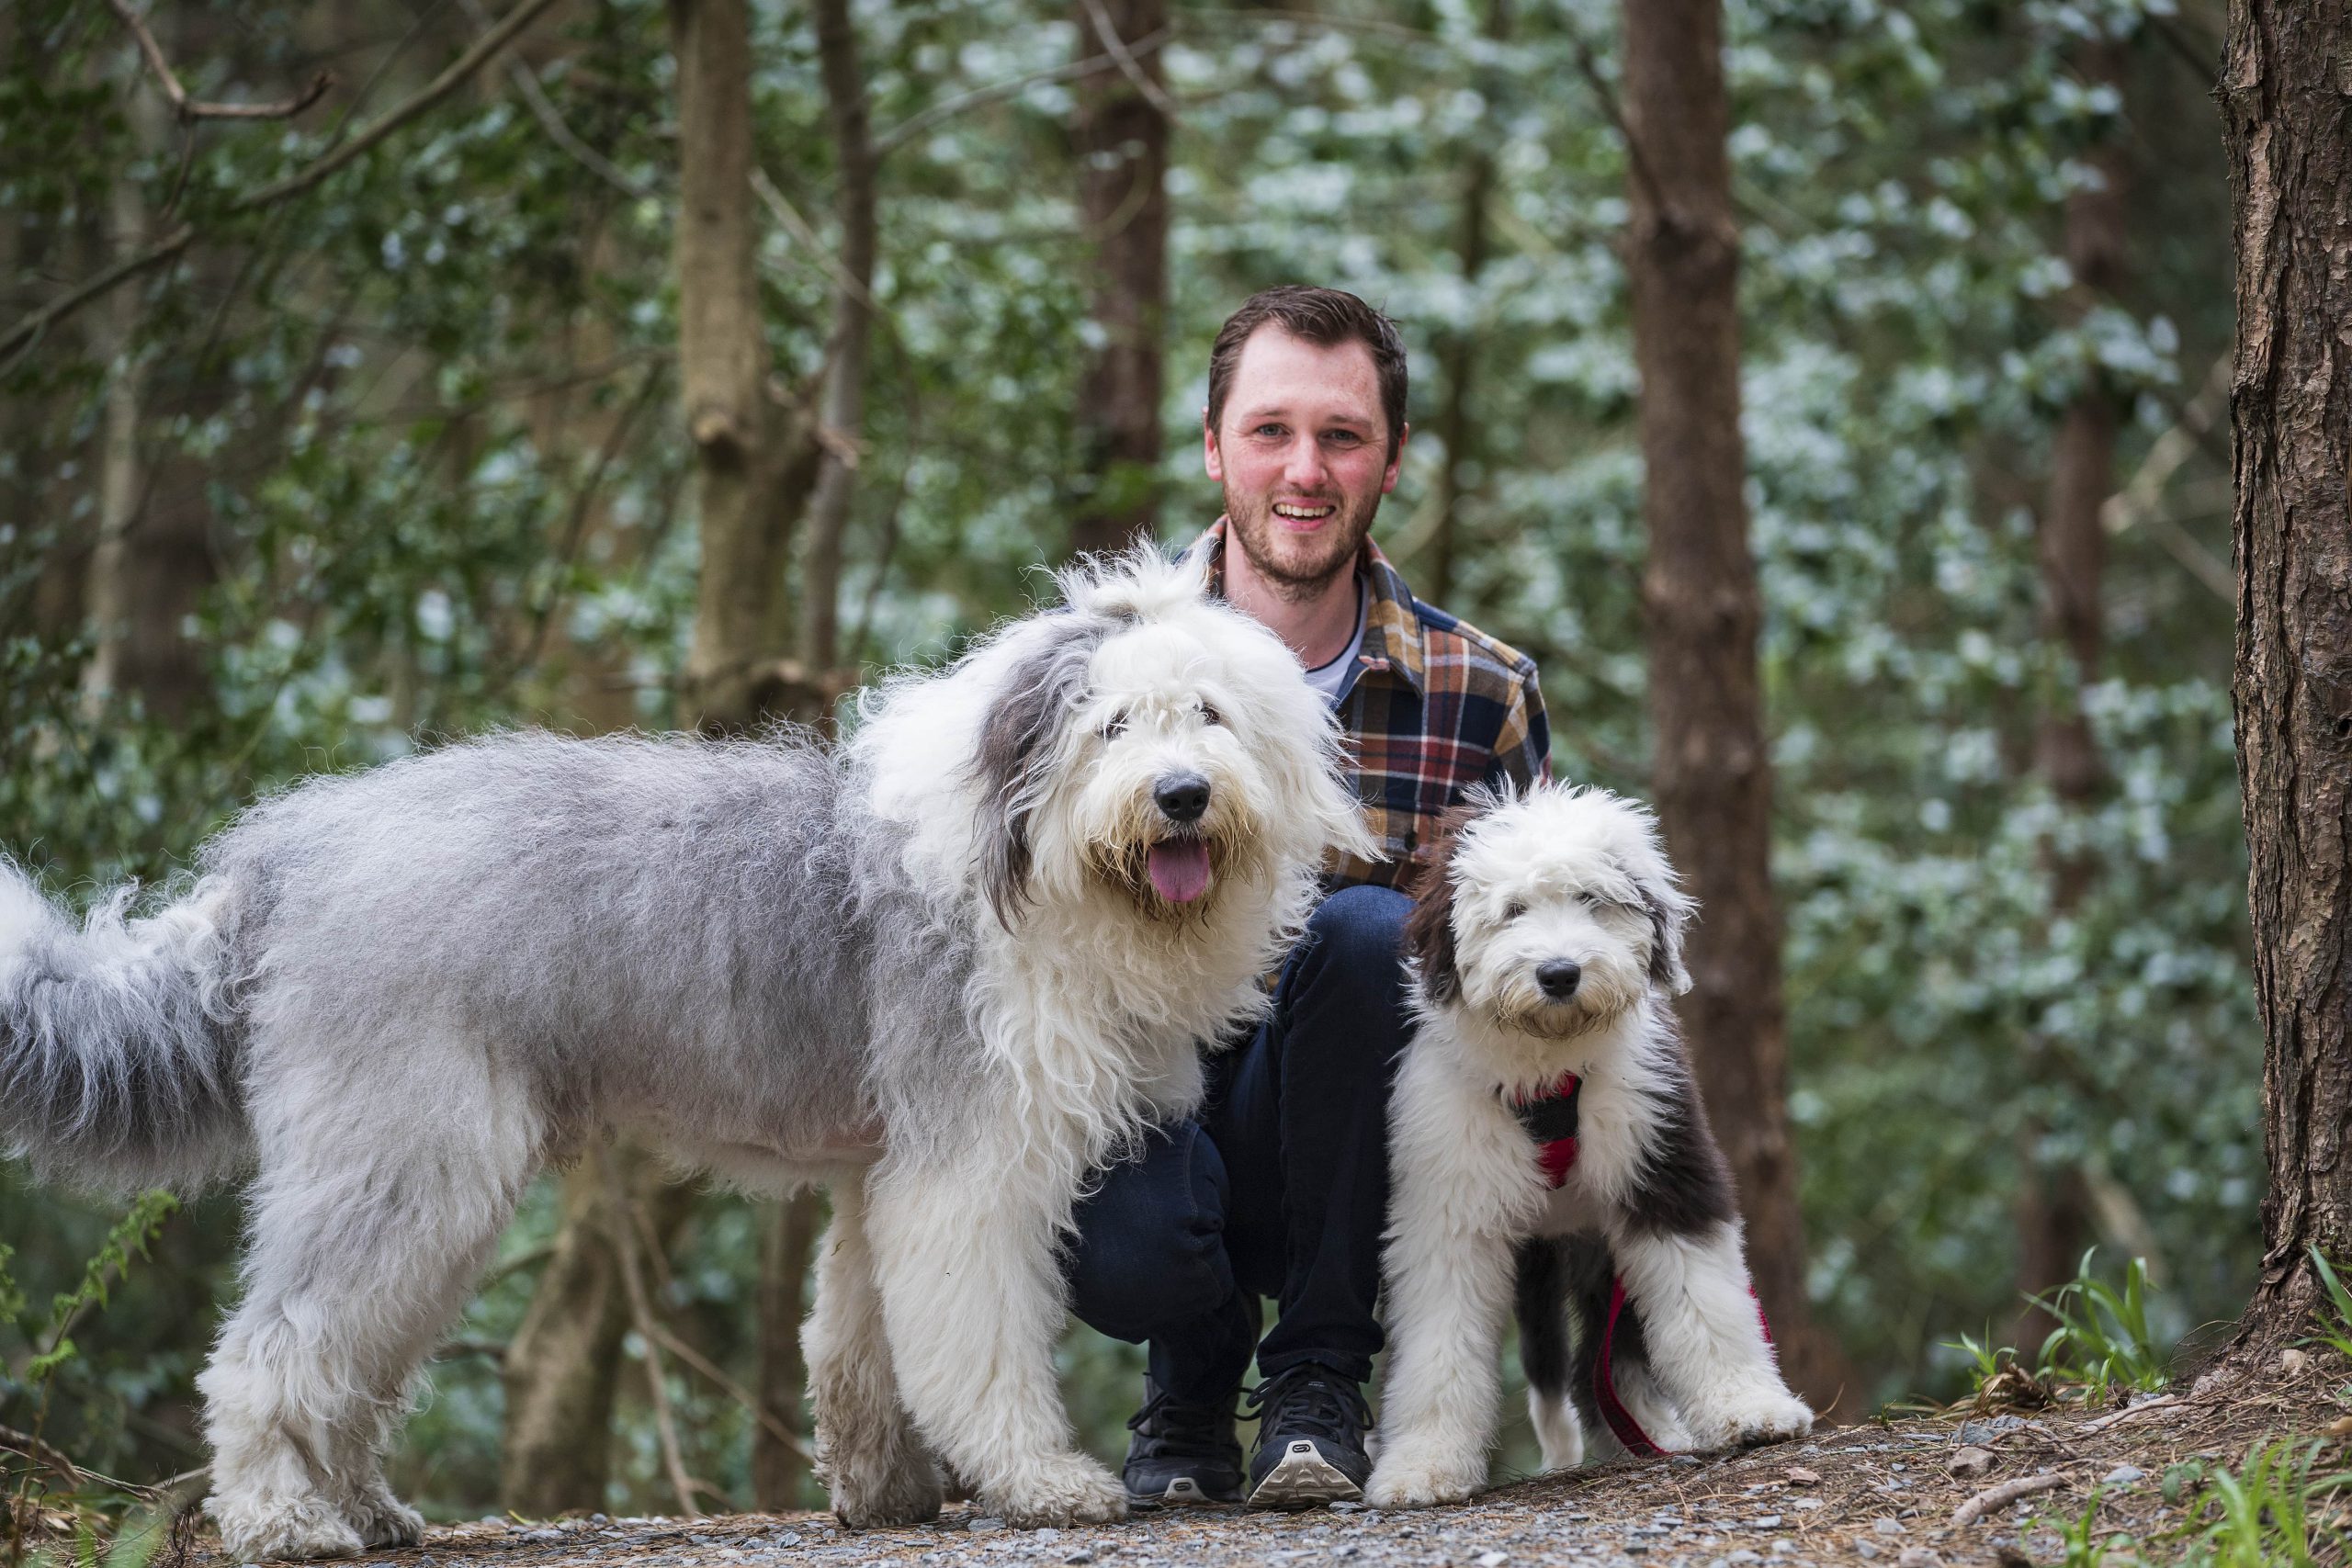 Man kneels in forest next to two old english sheepdogs